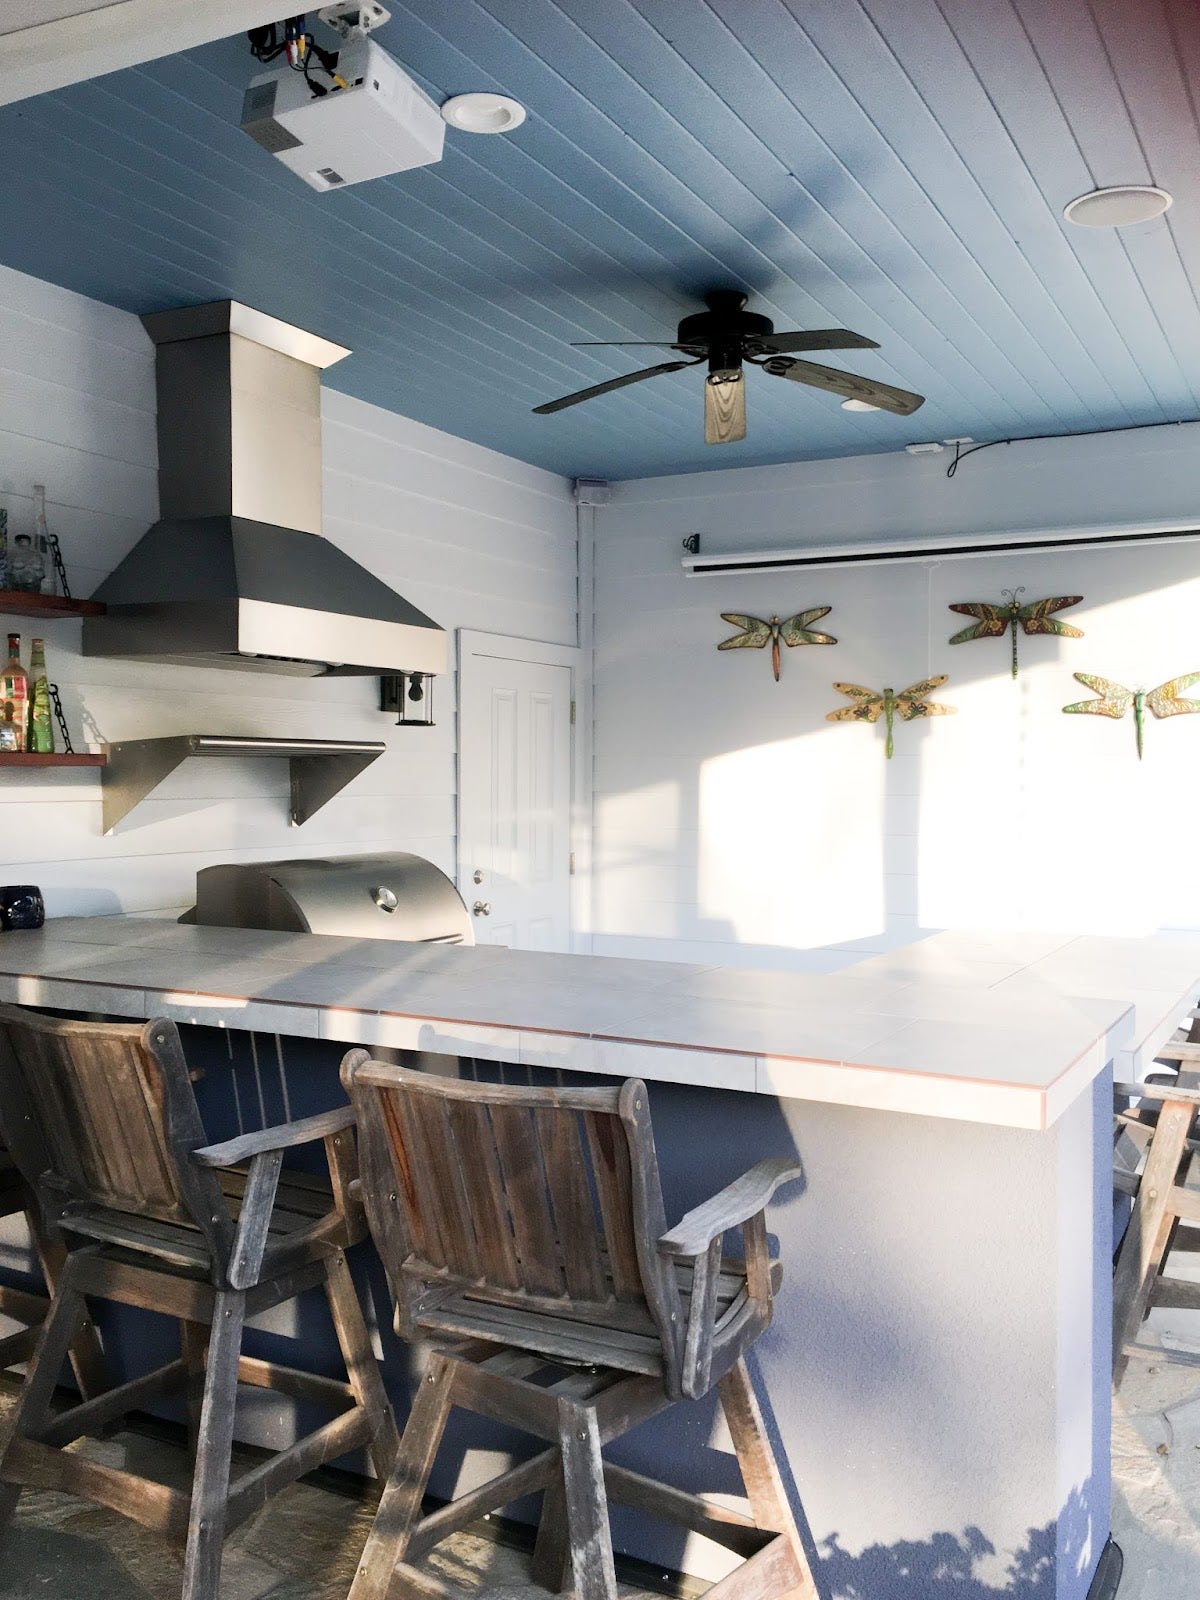 Beachy Bar & Grill: Proline hood adds a touch of function to this laid-back bar with a beachy vibe. Wood and blue ceiling create a nautical feel, perfect for grilling and chilling. - Proline Range Hoods - prolinerangehoods.com 